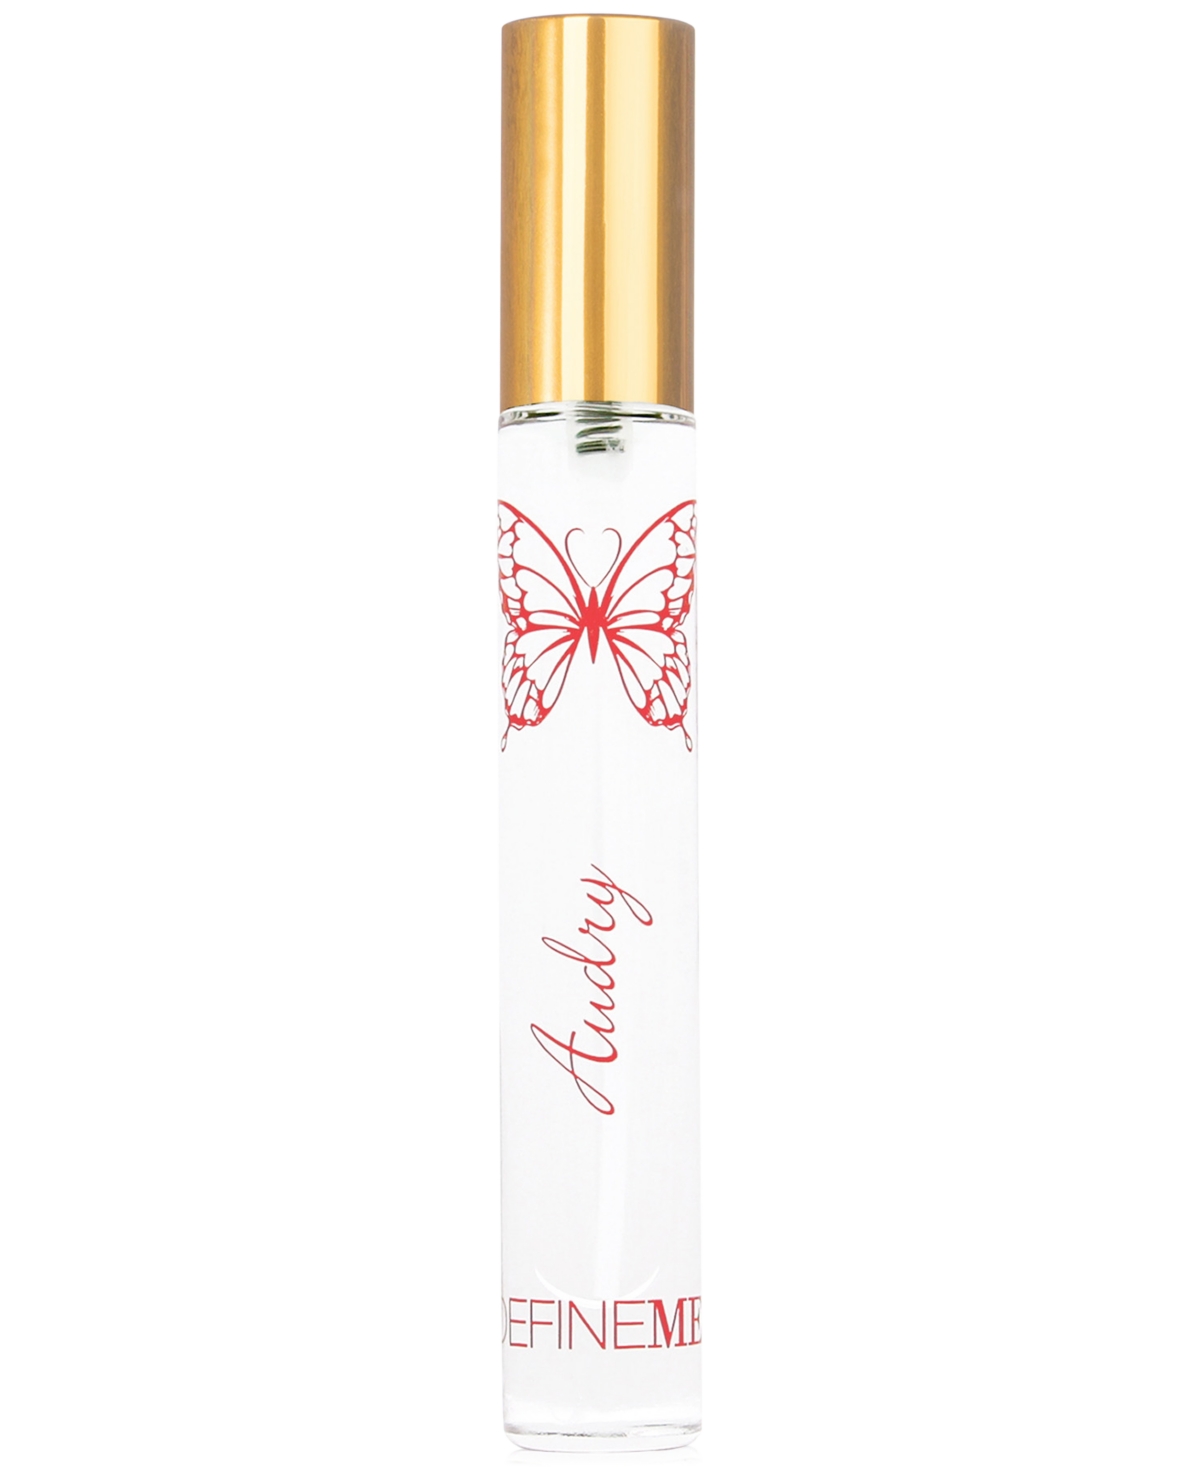 DefineMe Audry 'On The Go' Natural Perfume Mist - 0.30 oz